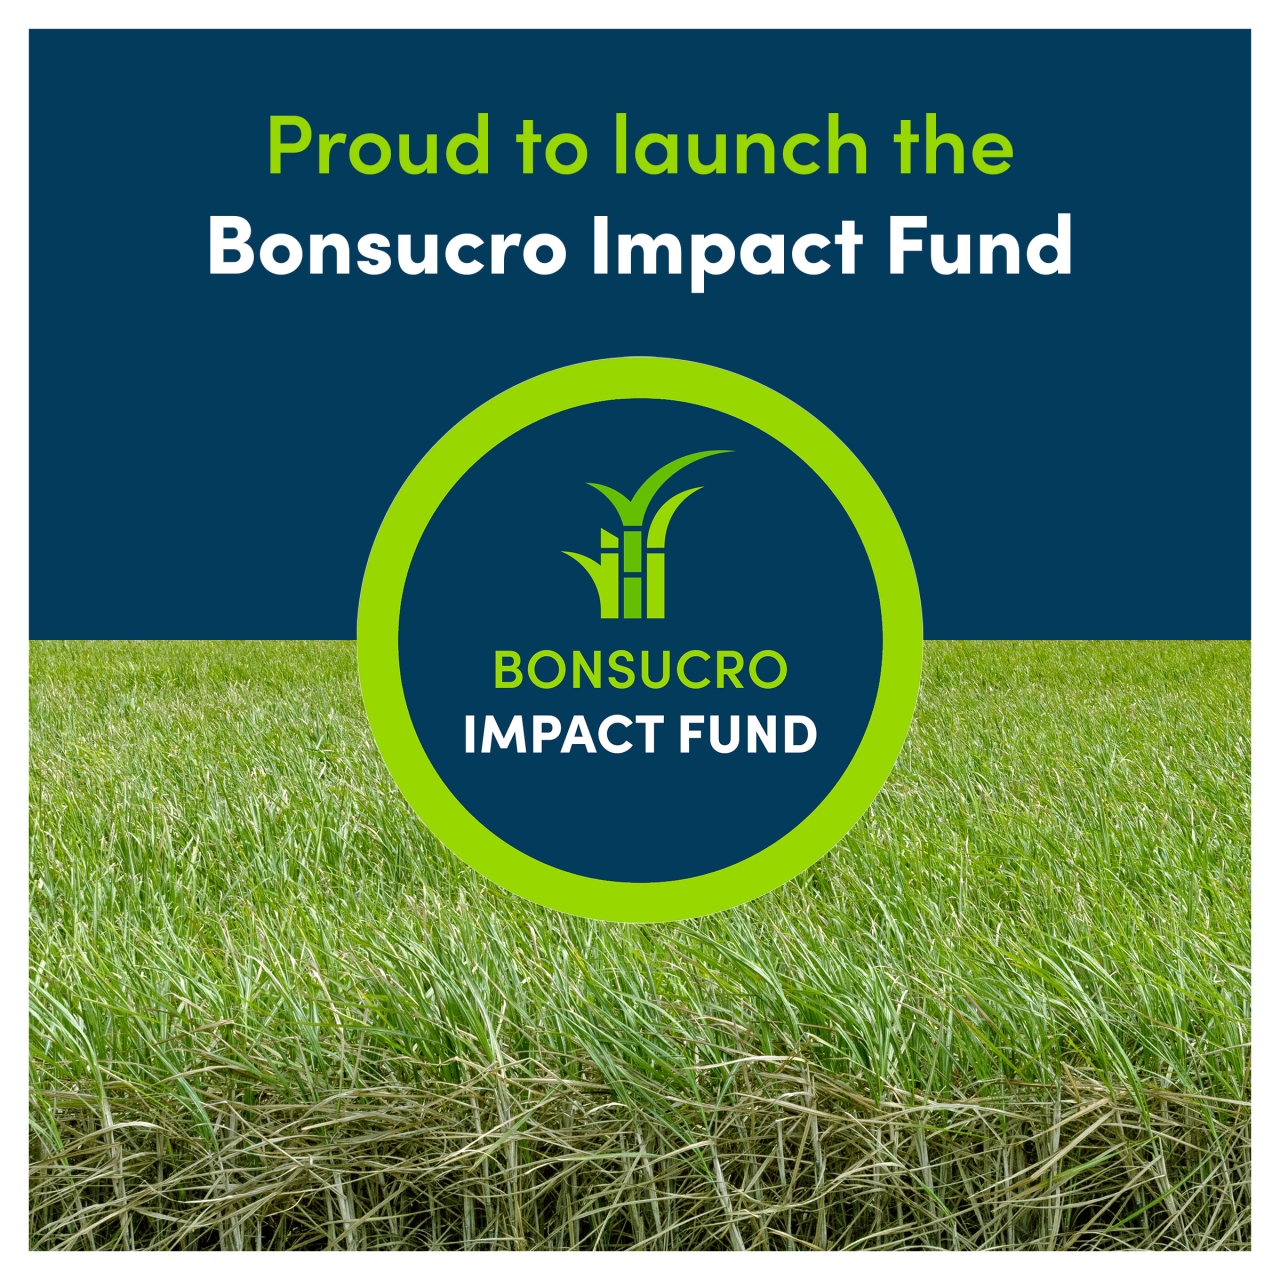 Proud to launch the Bonsucro Impact Fund